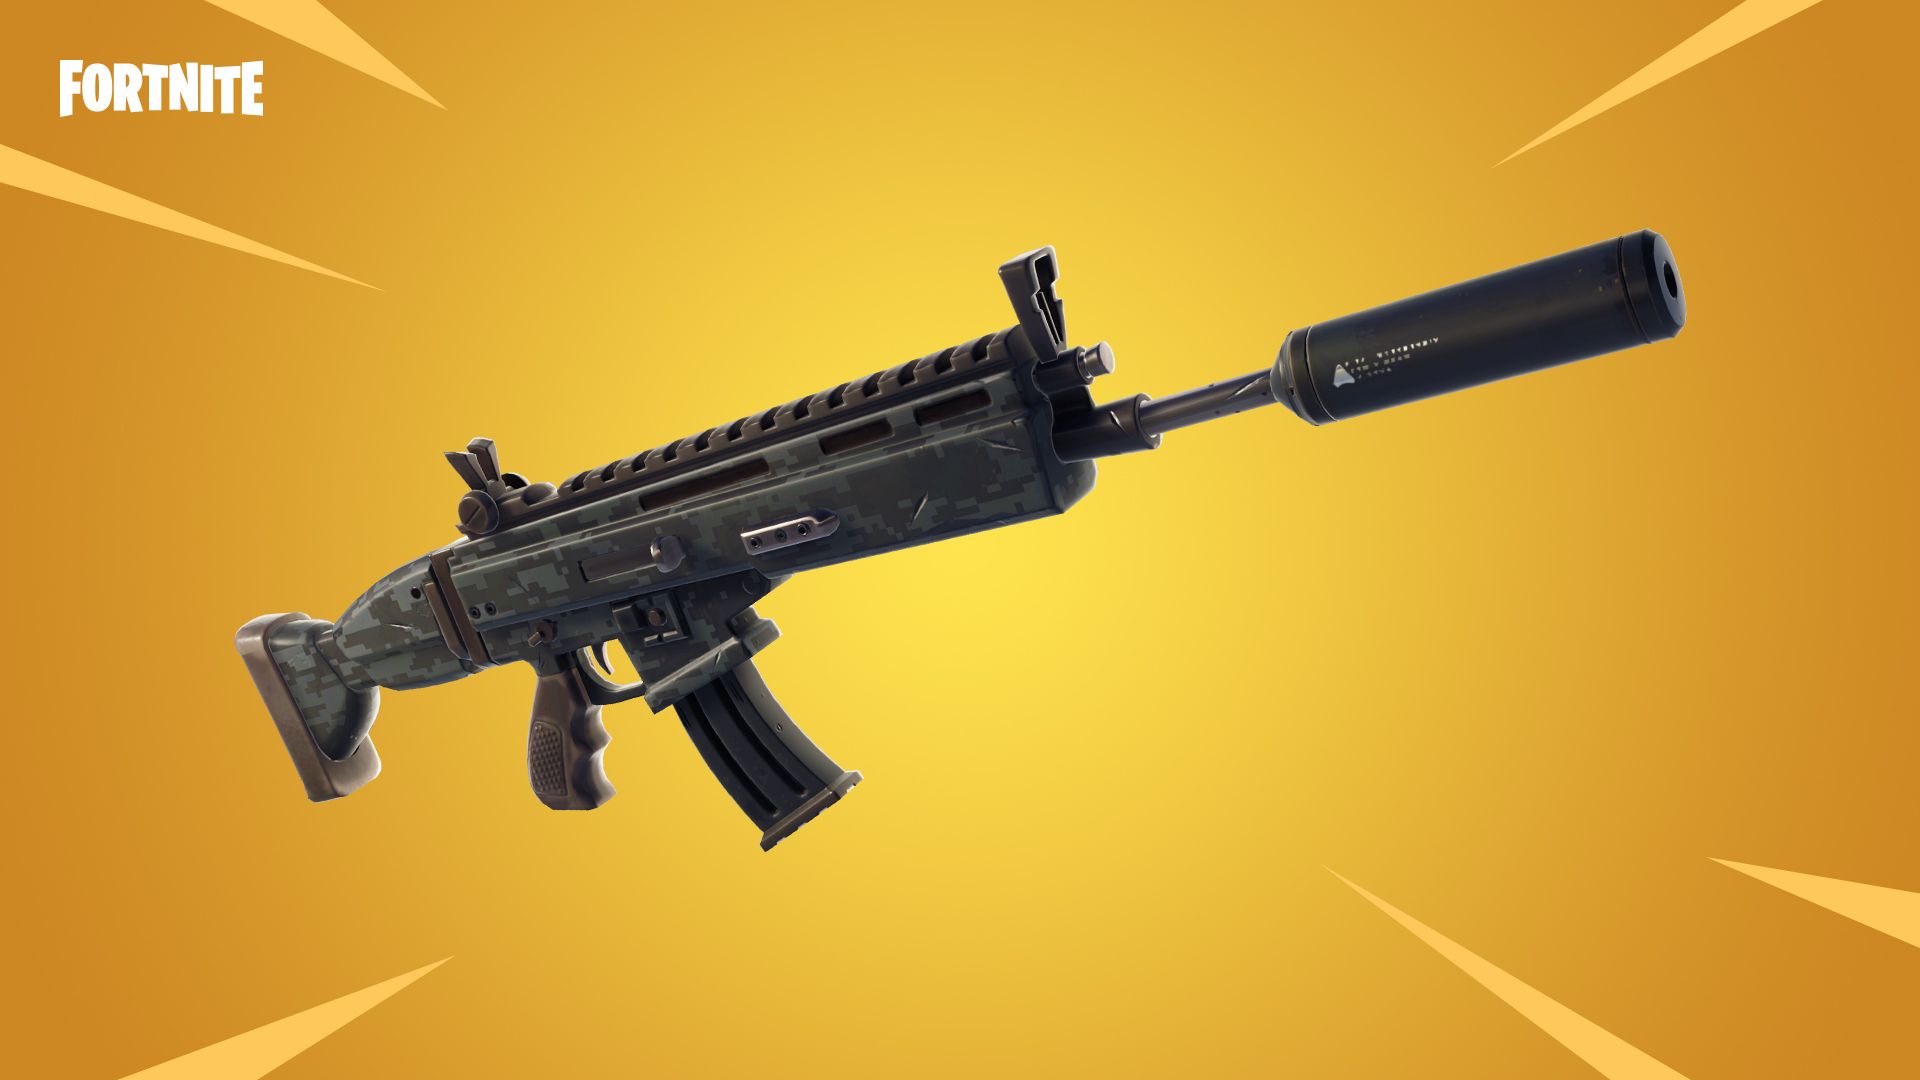 Content Update v5.40 - Suppressed Assault Rifle, Drum Gun vaulted and more